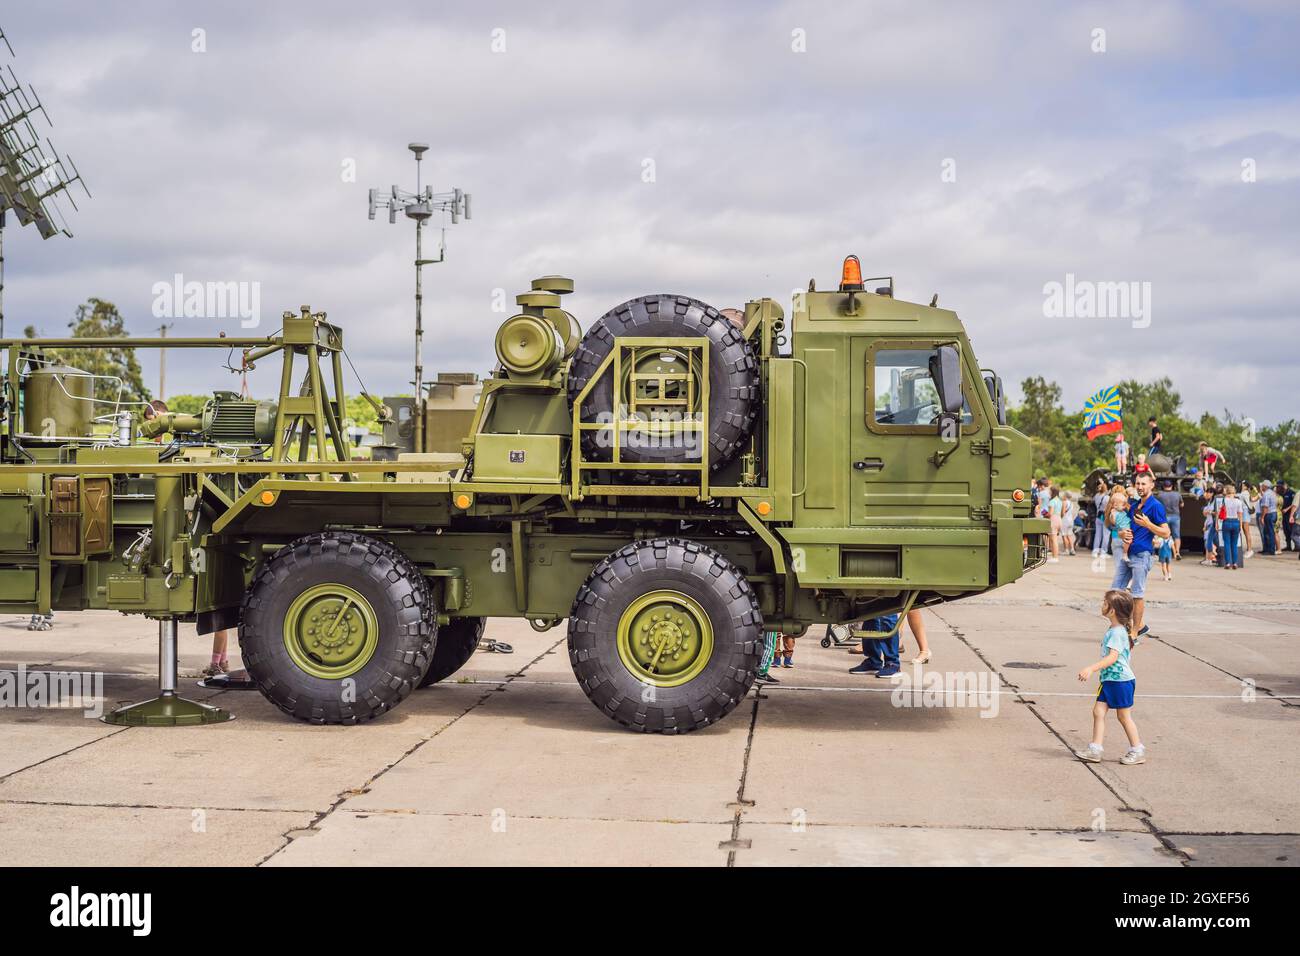 Russia, Vladivostok, 26.08.2021 - Exhibition of military equipment and transport in Russia Stock Photo